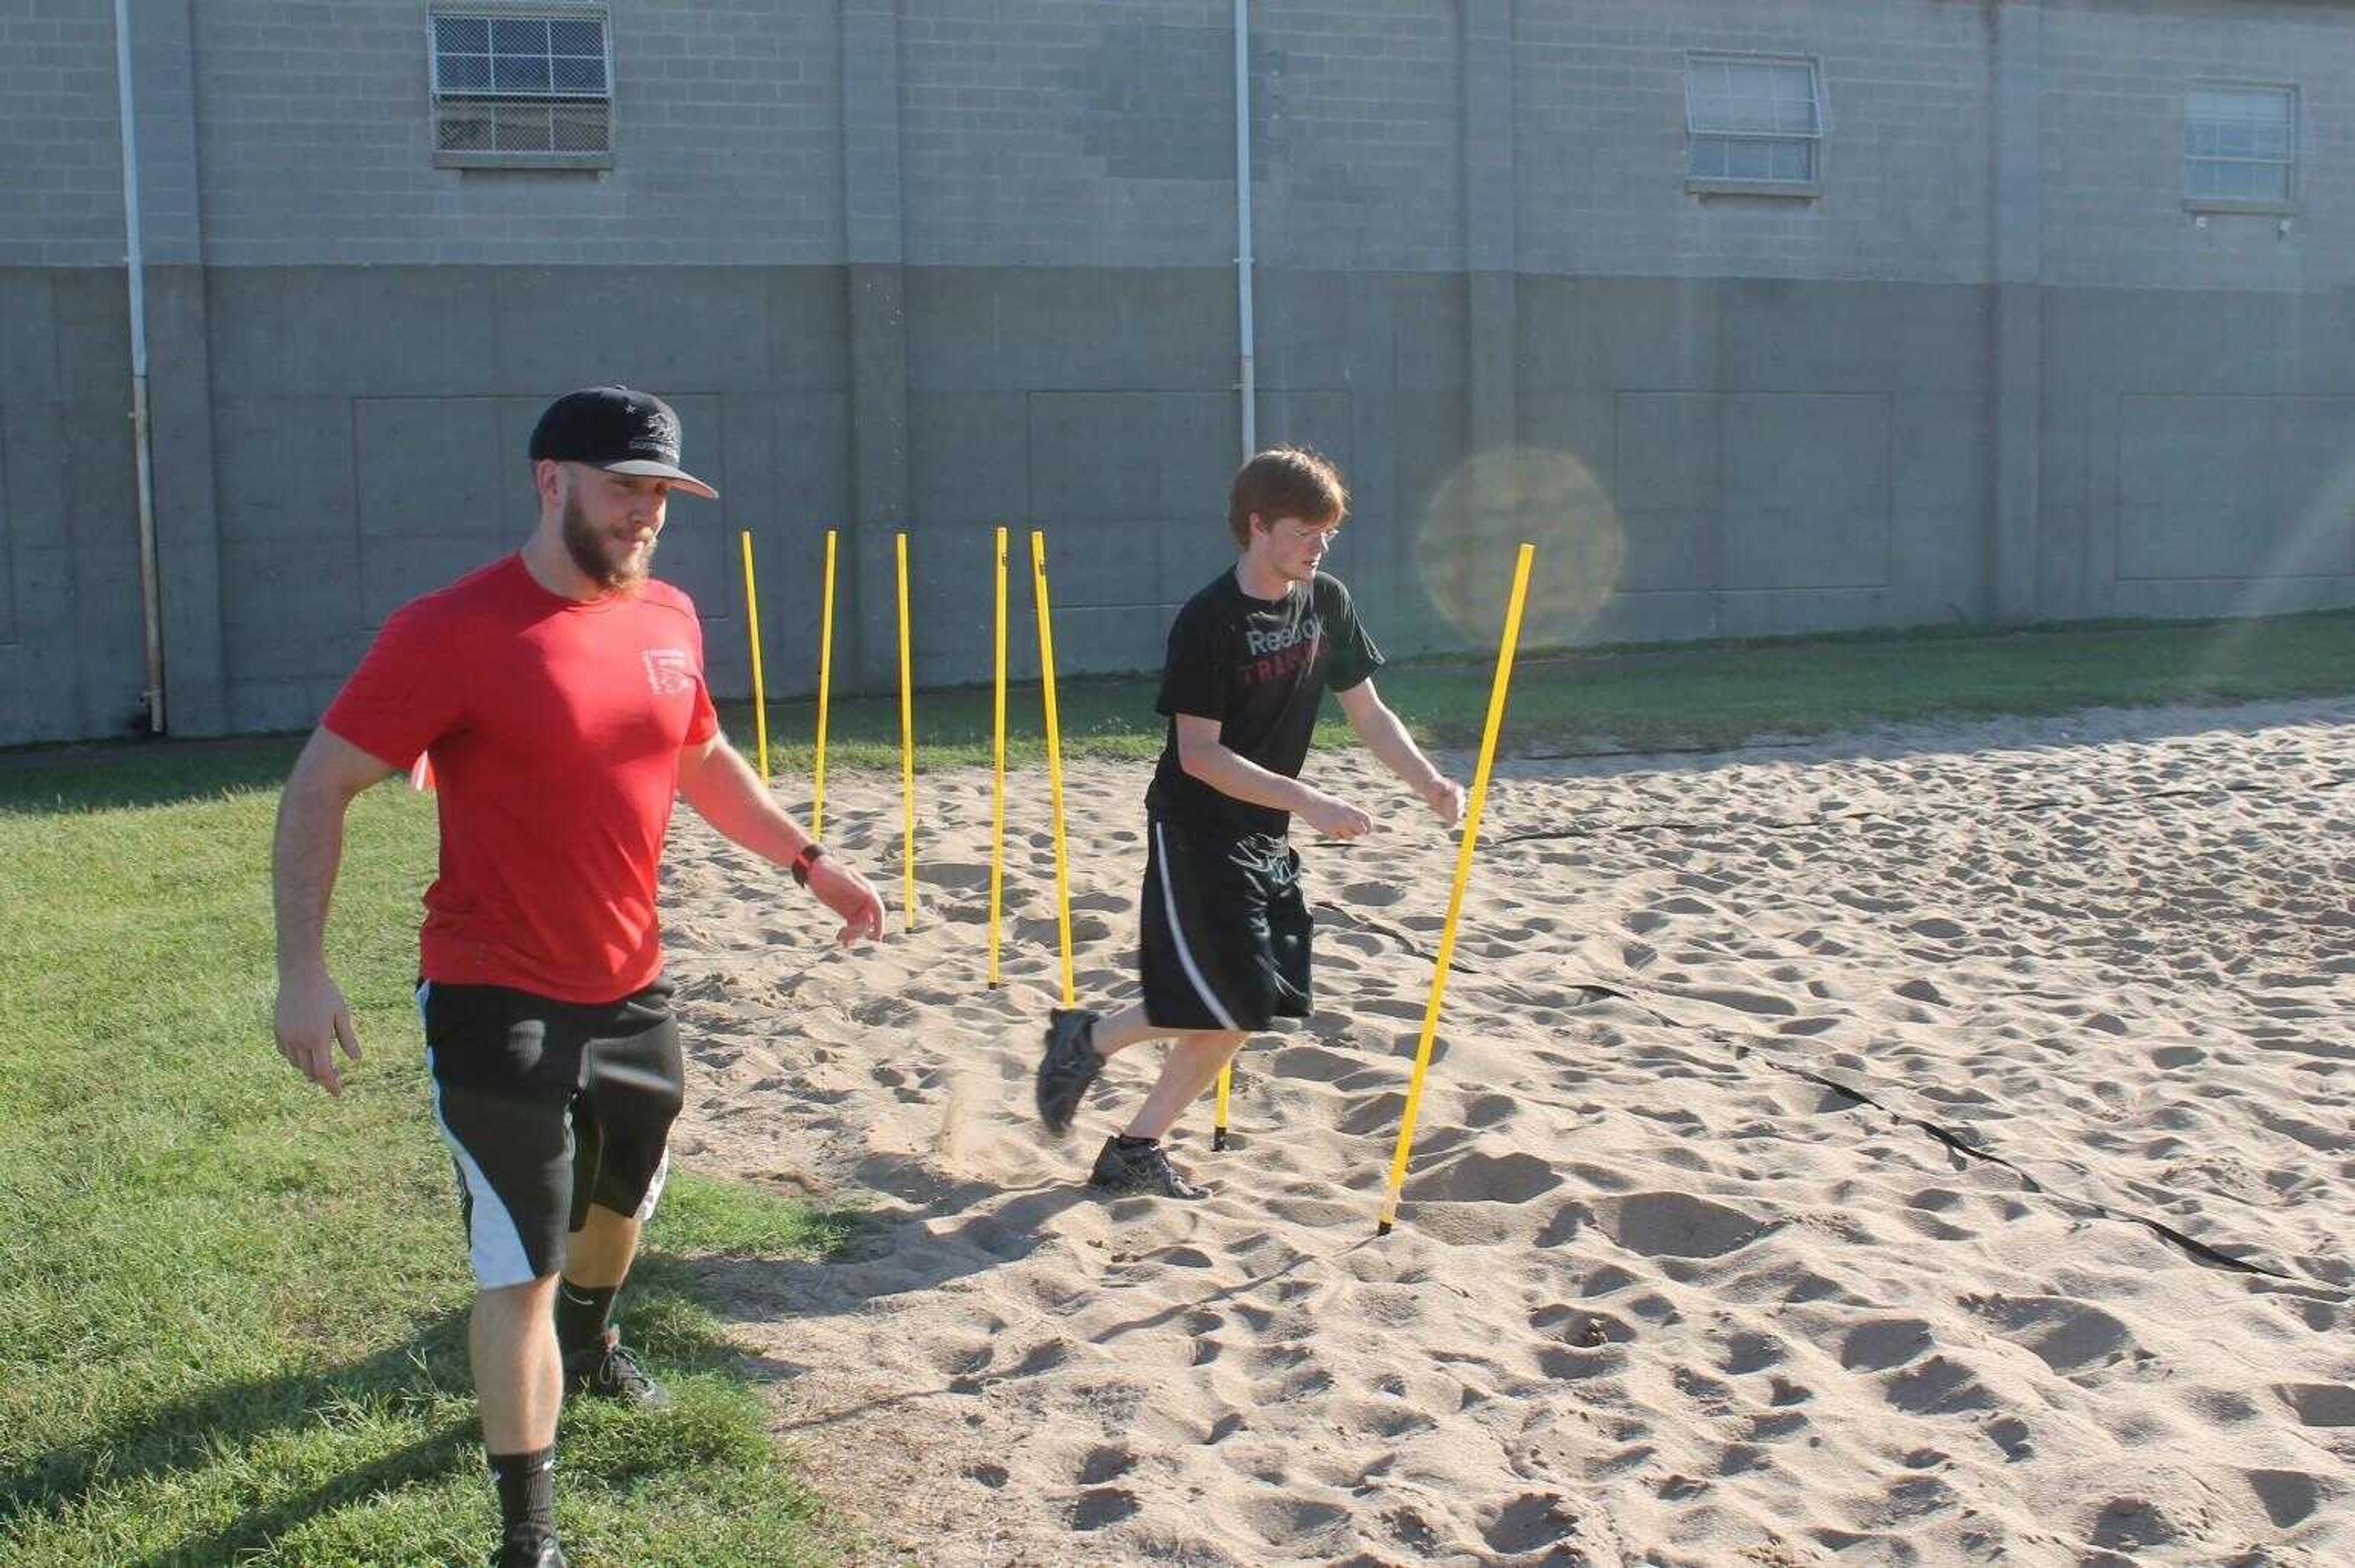 Justin Marks coached student as he attempts to complete the obstacle course.